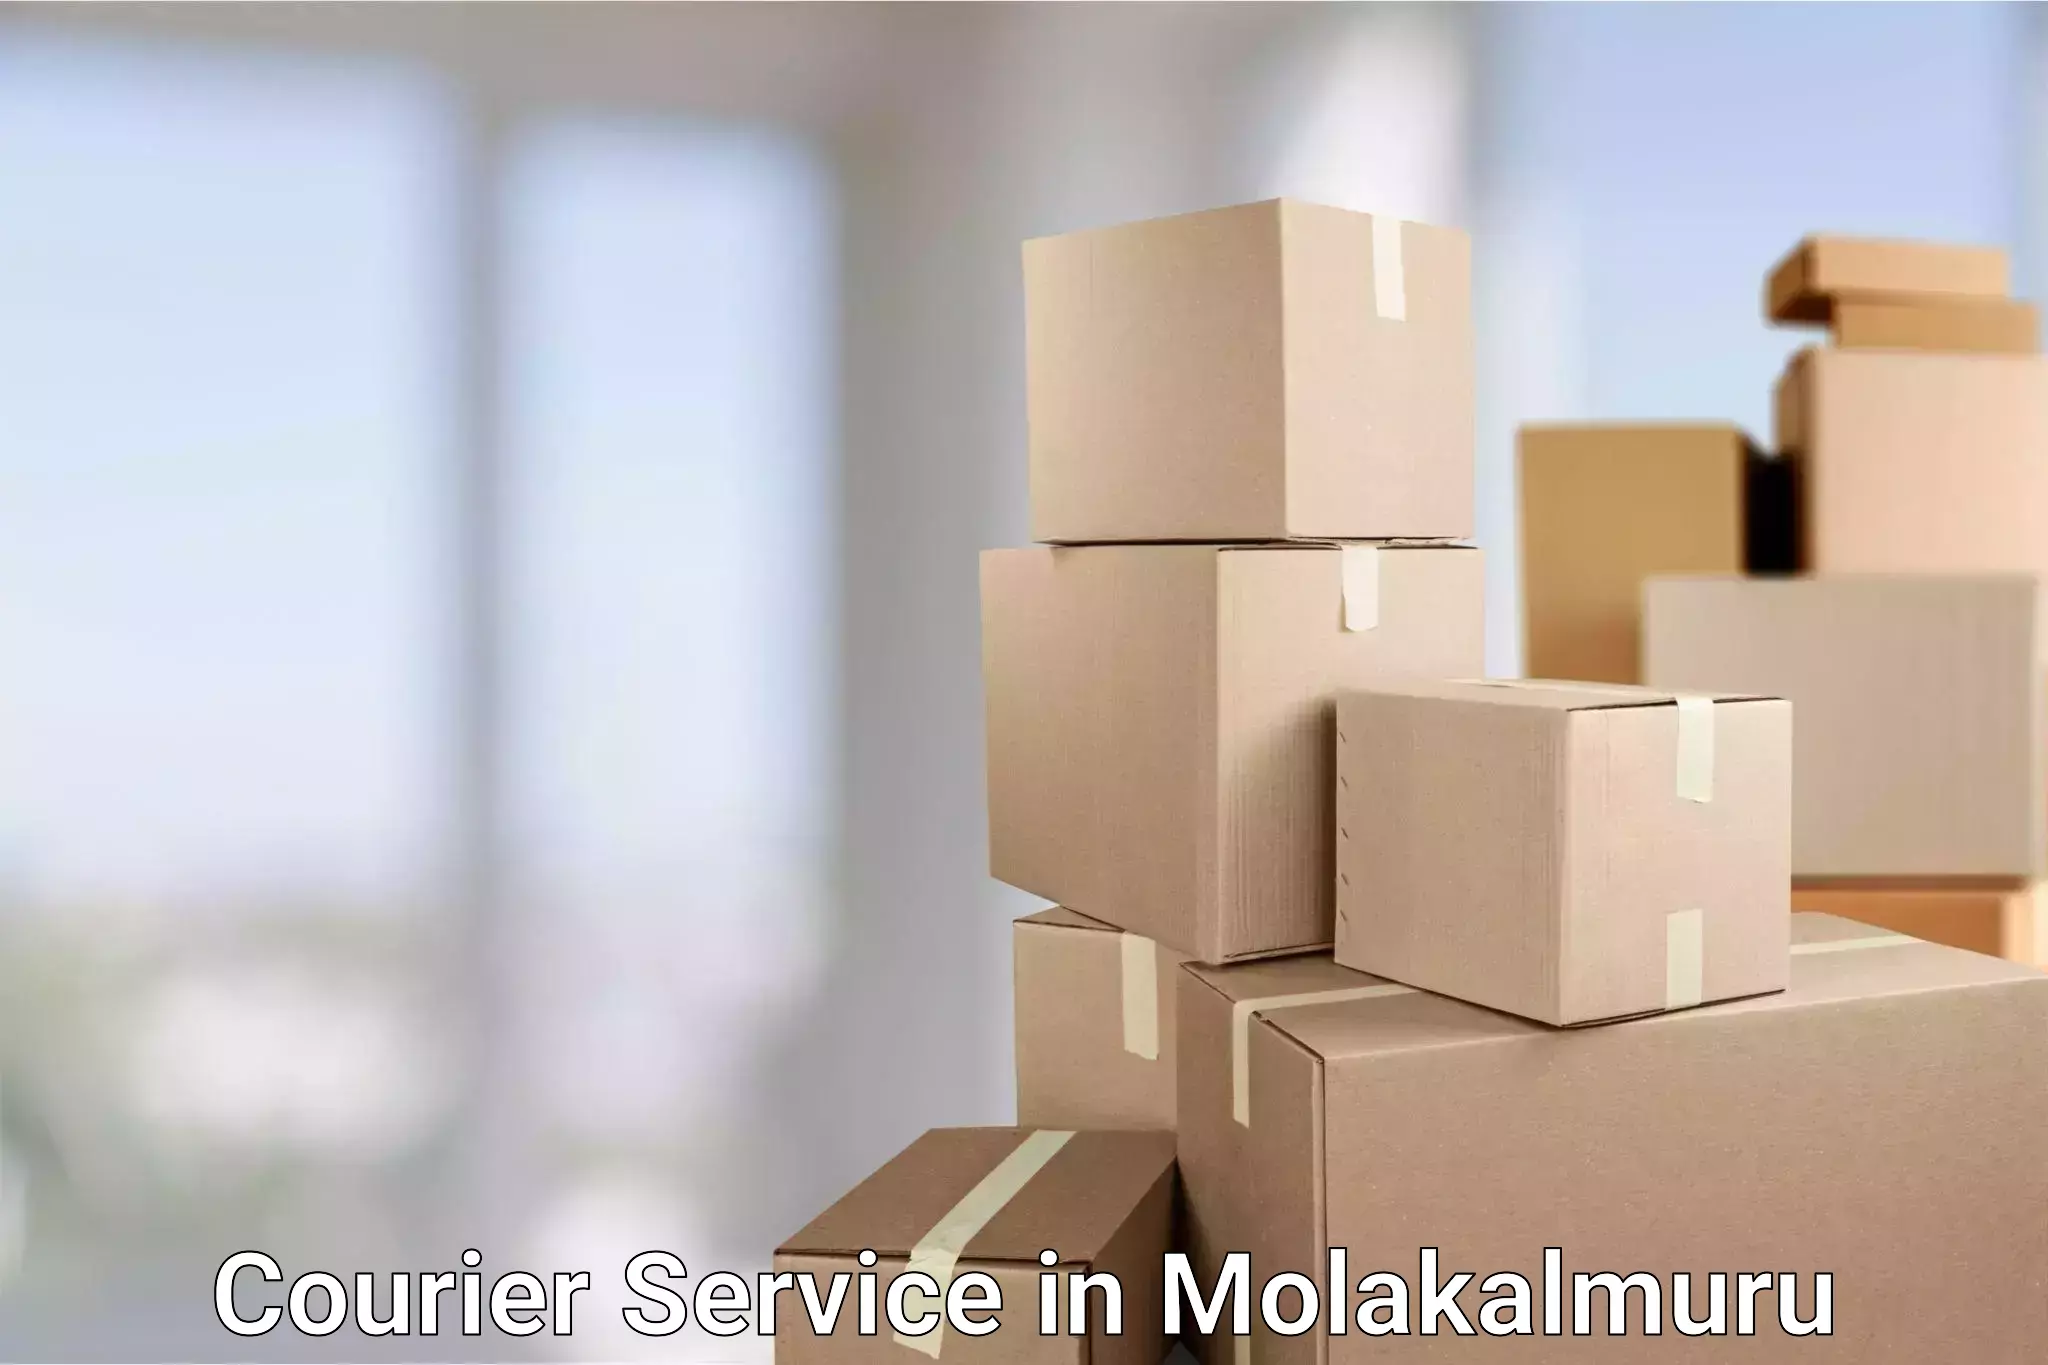 Quality courier services in Molakalmuru